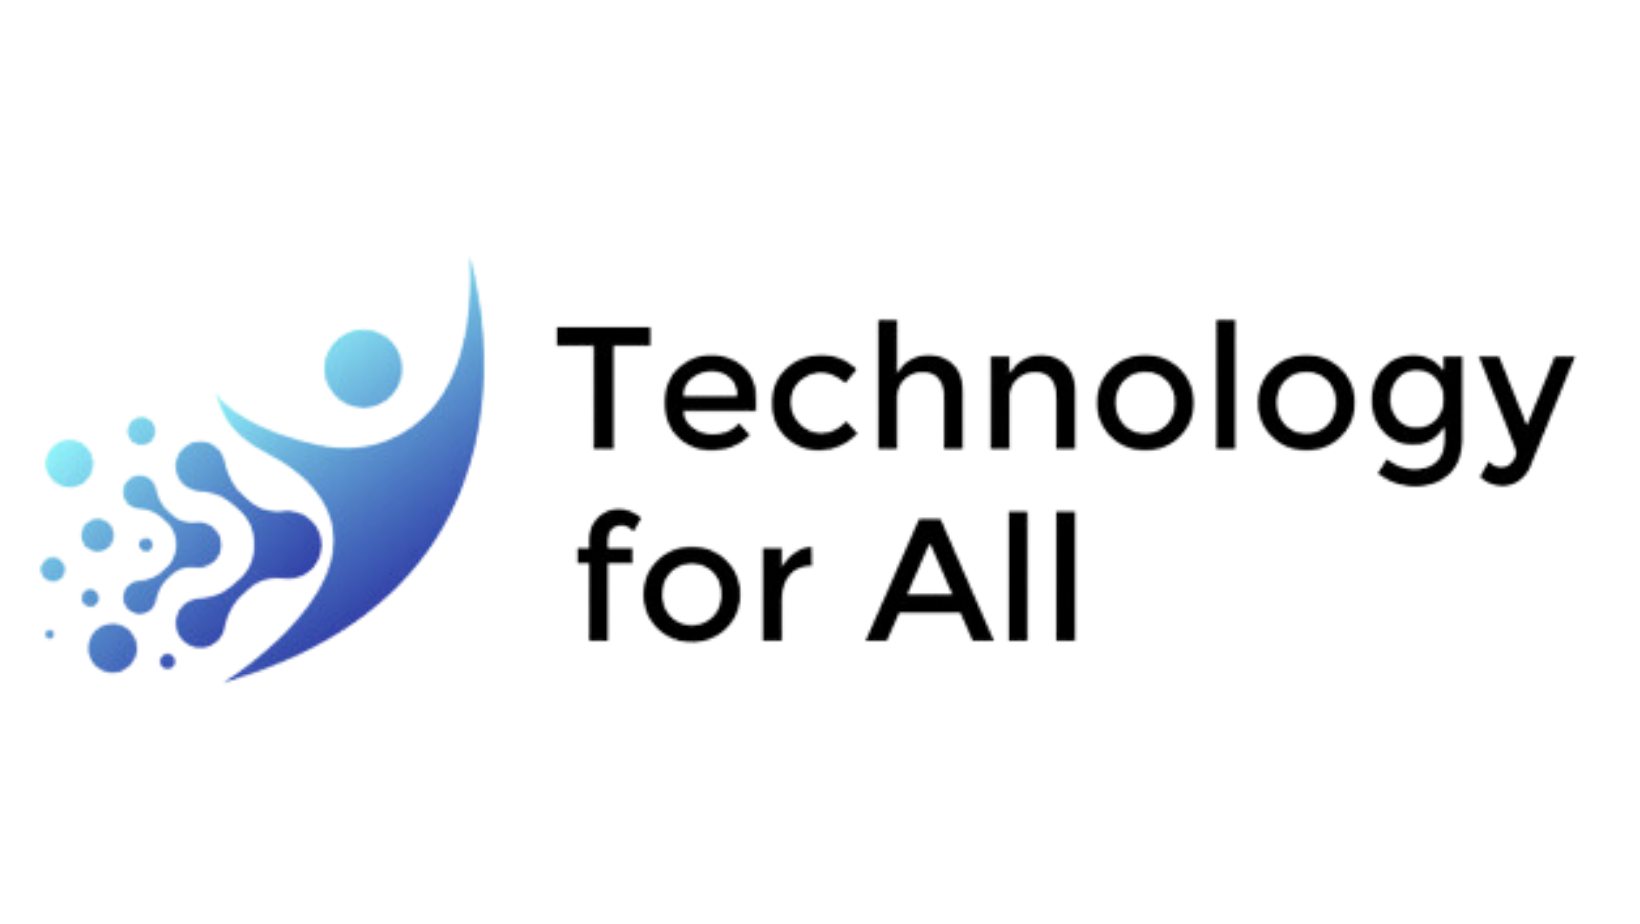 Technology for All logo. Text to the right of the logo reads Technology for All